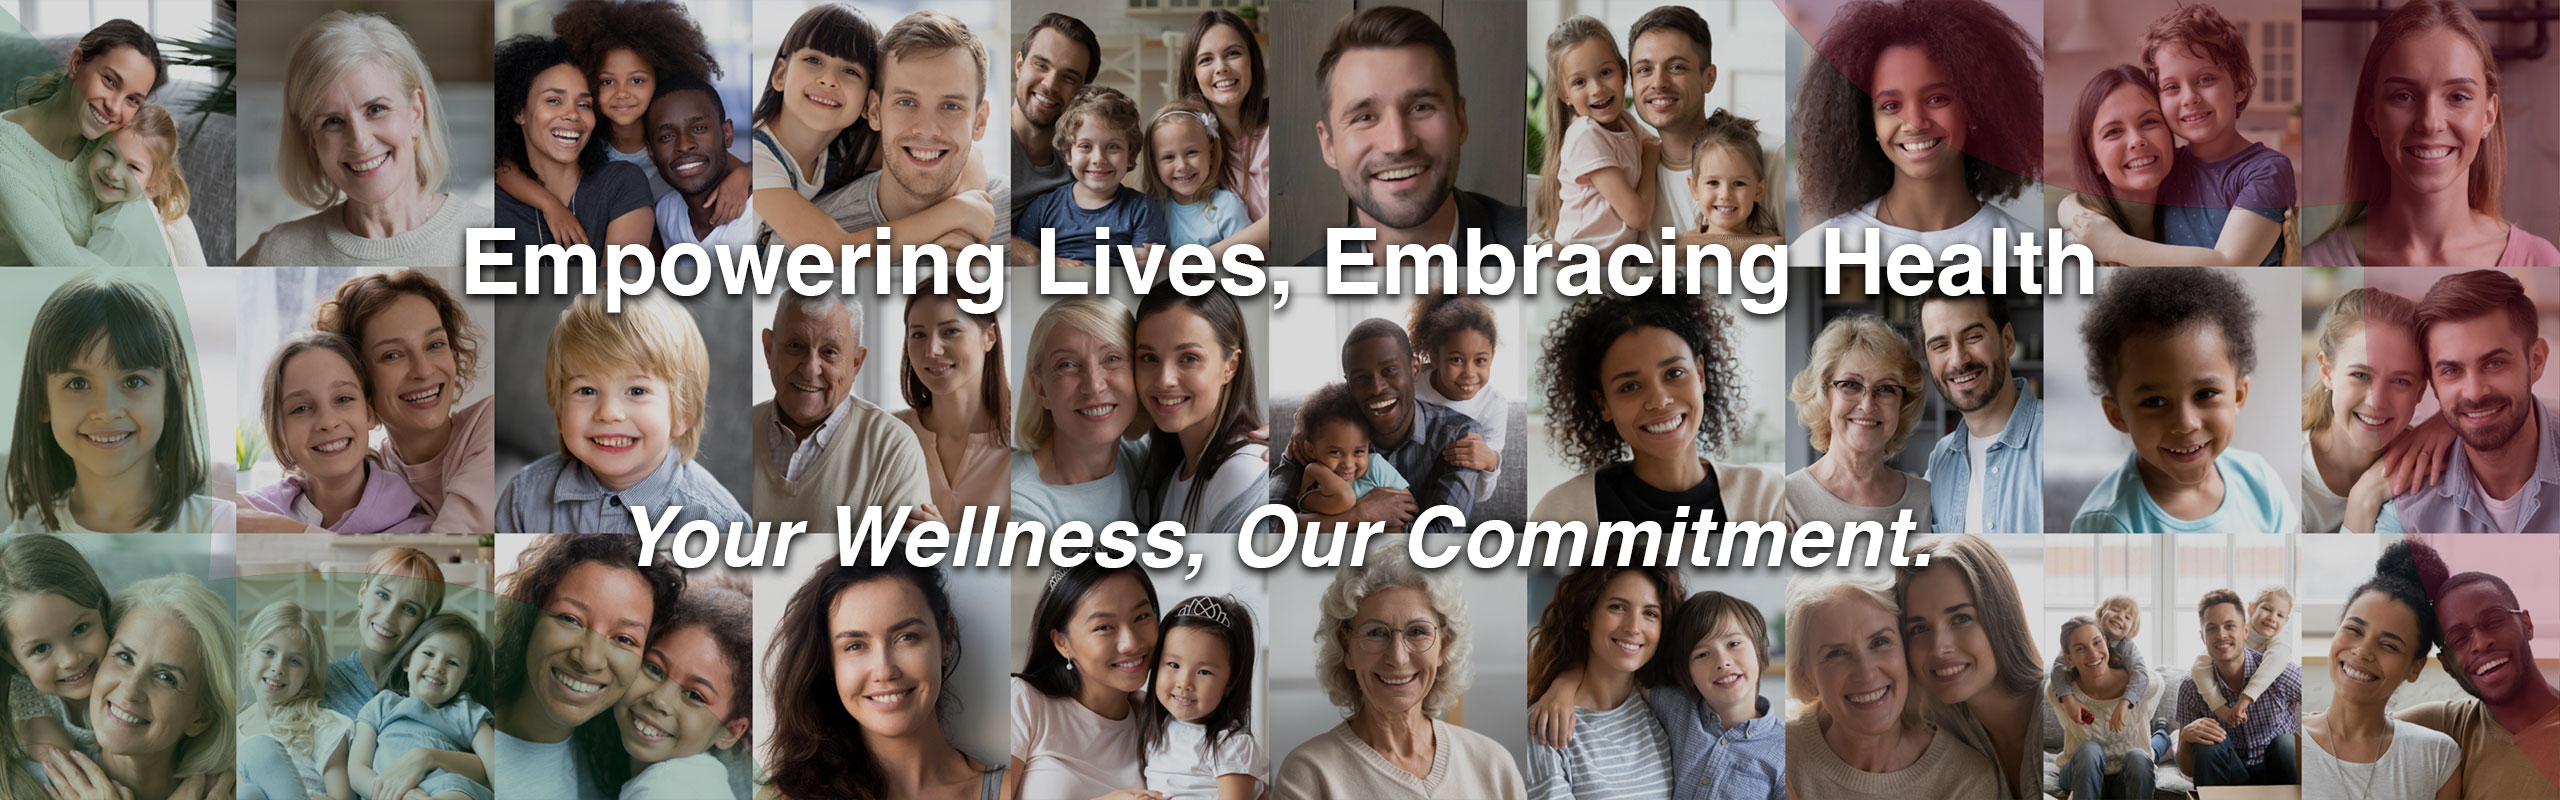 Empowering Lives, Embracing Health
Your Wellness, Our Commitment